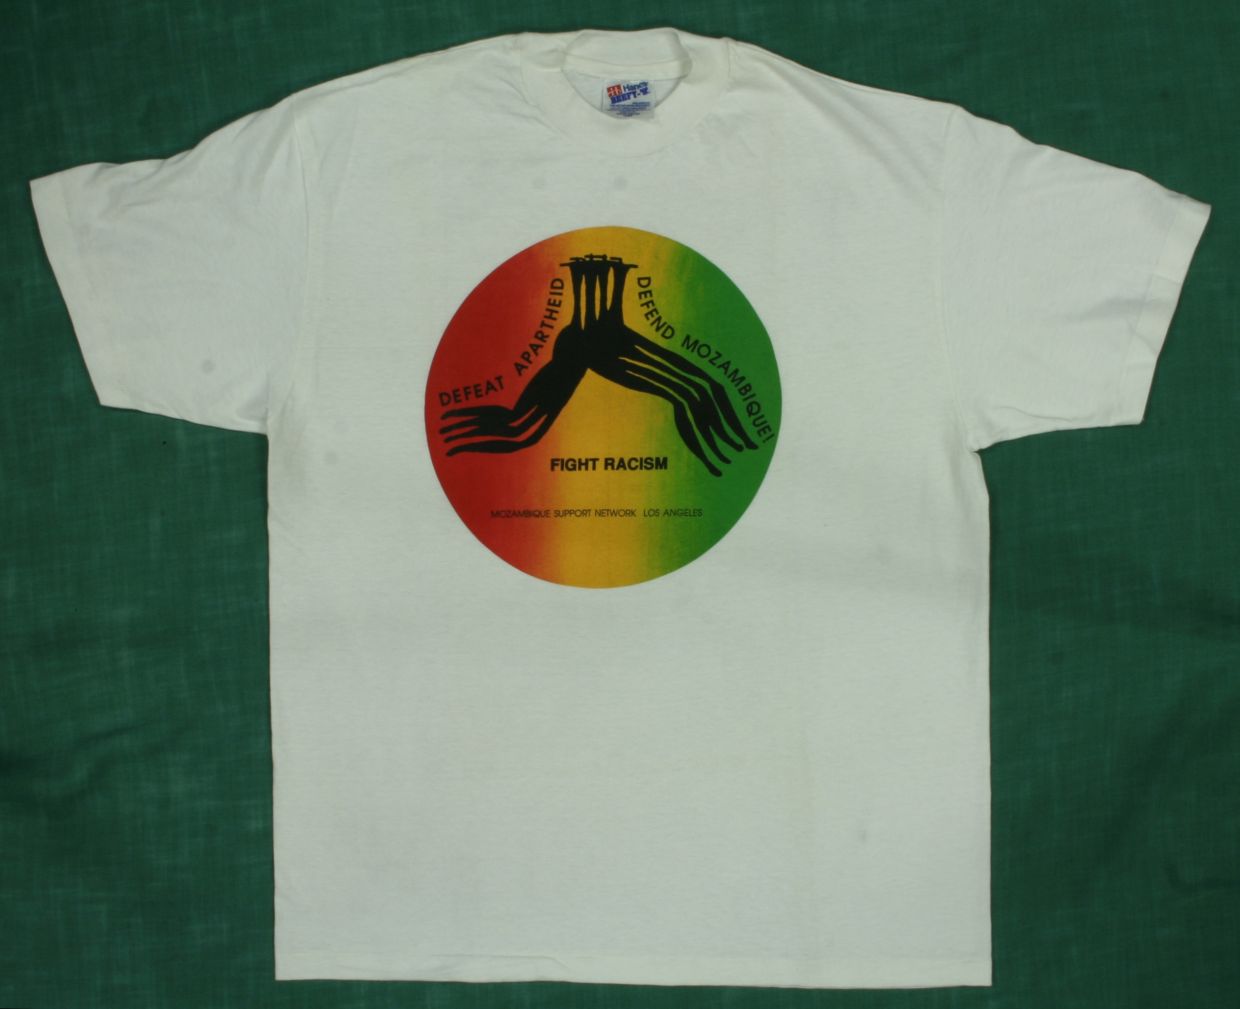 The T-shirt design, by Rachel Chapman, shows four black, abstract figures leaping together across a circle with a horizontal pattern of red, yellow, and green. The T-shirt was also produced with a white design on black. The &ldquo;Baobab News&rdquo; December 1992 / January 1993 issue (available on this website) announced that the shirt was available for sale.